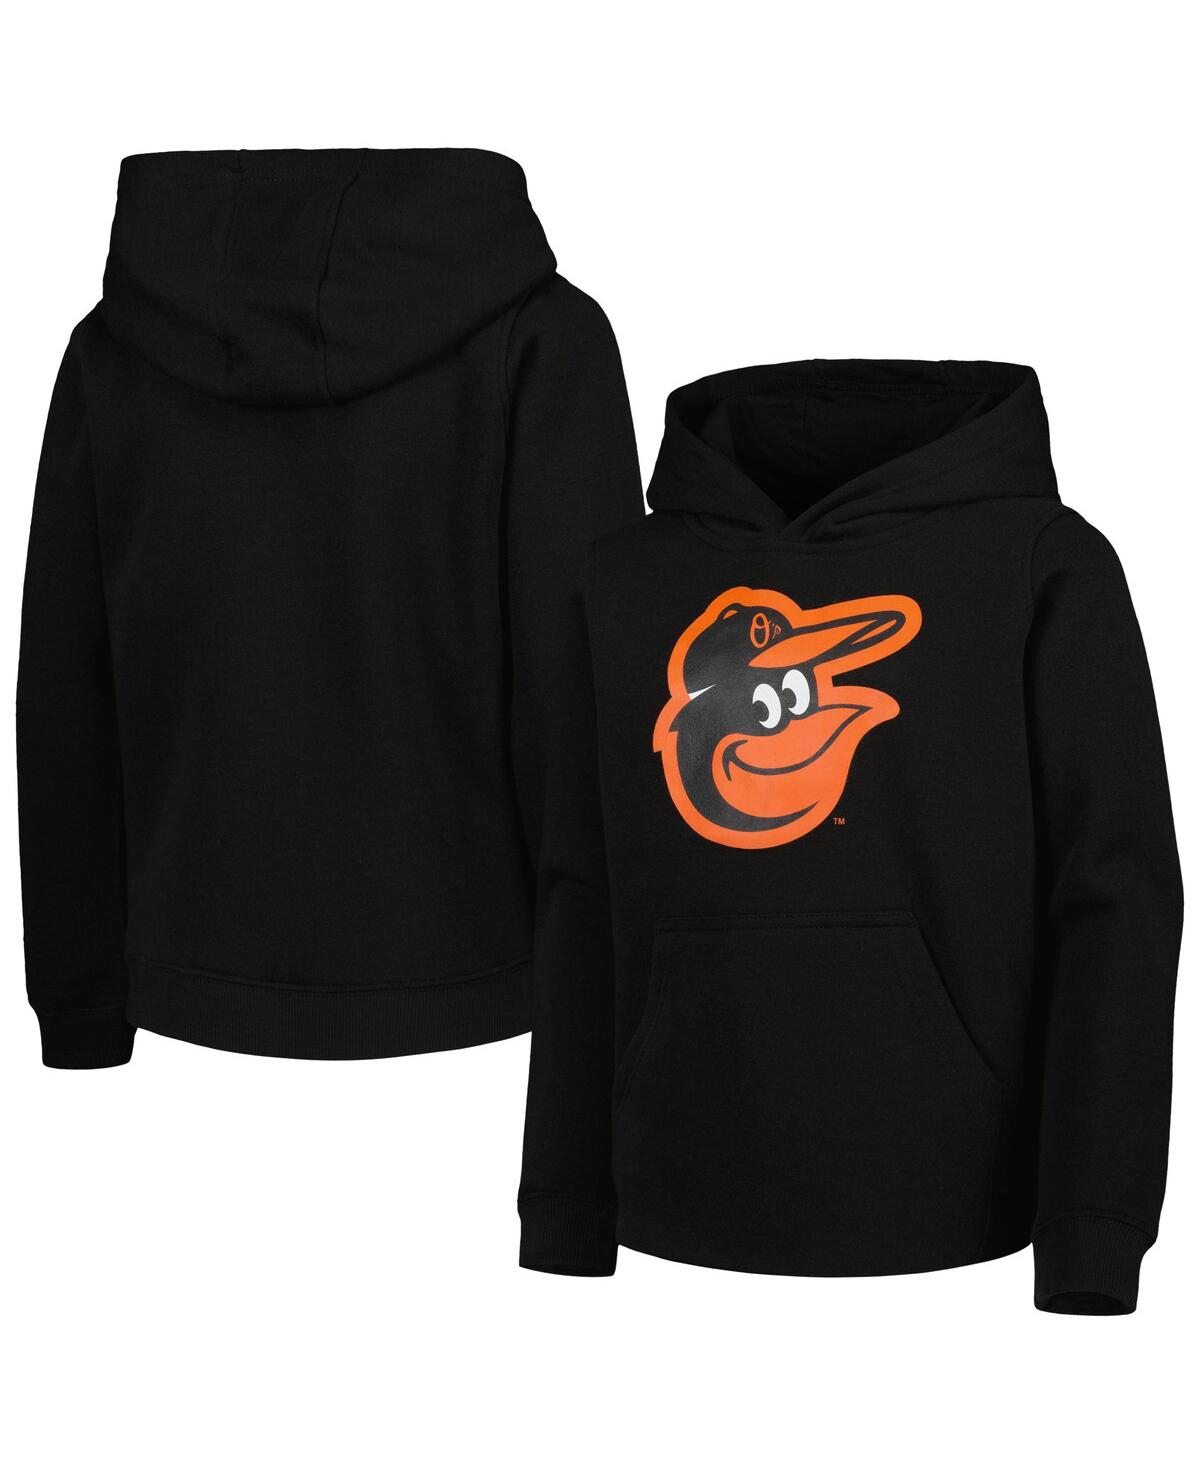 Outerstuff Kids' Big Boys And Girls Black Baltimore Orioles Team Primary Logo Pullover Hoodie